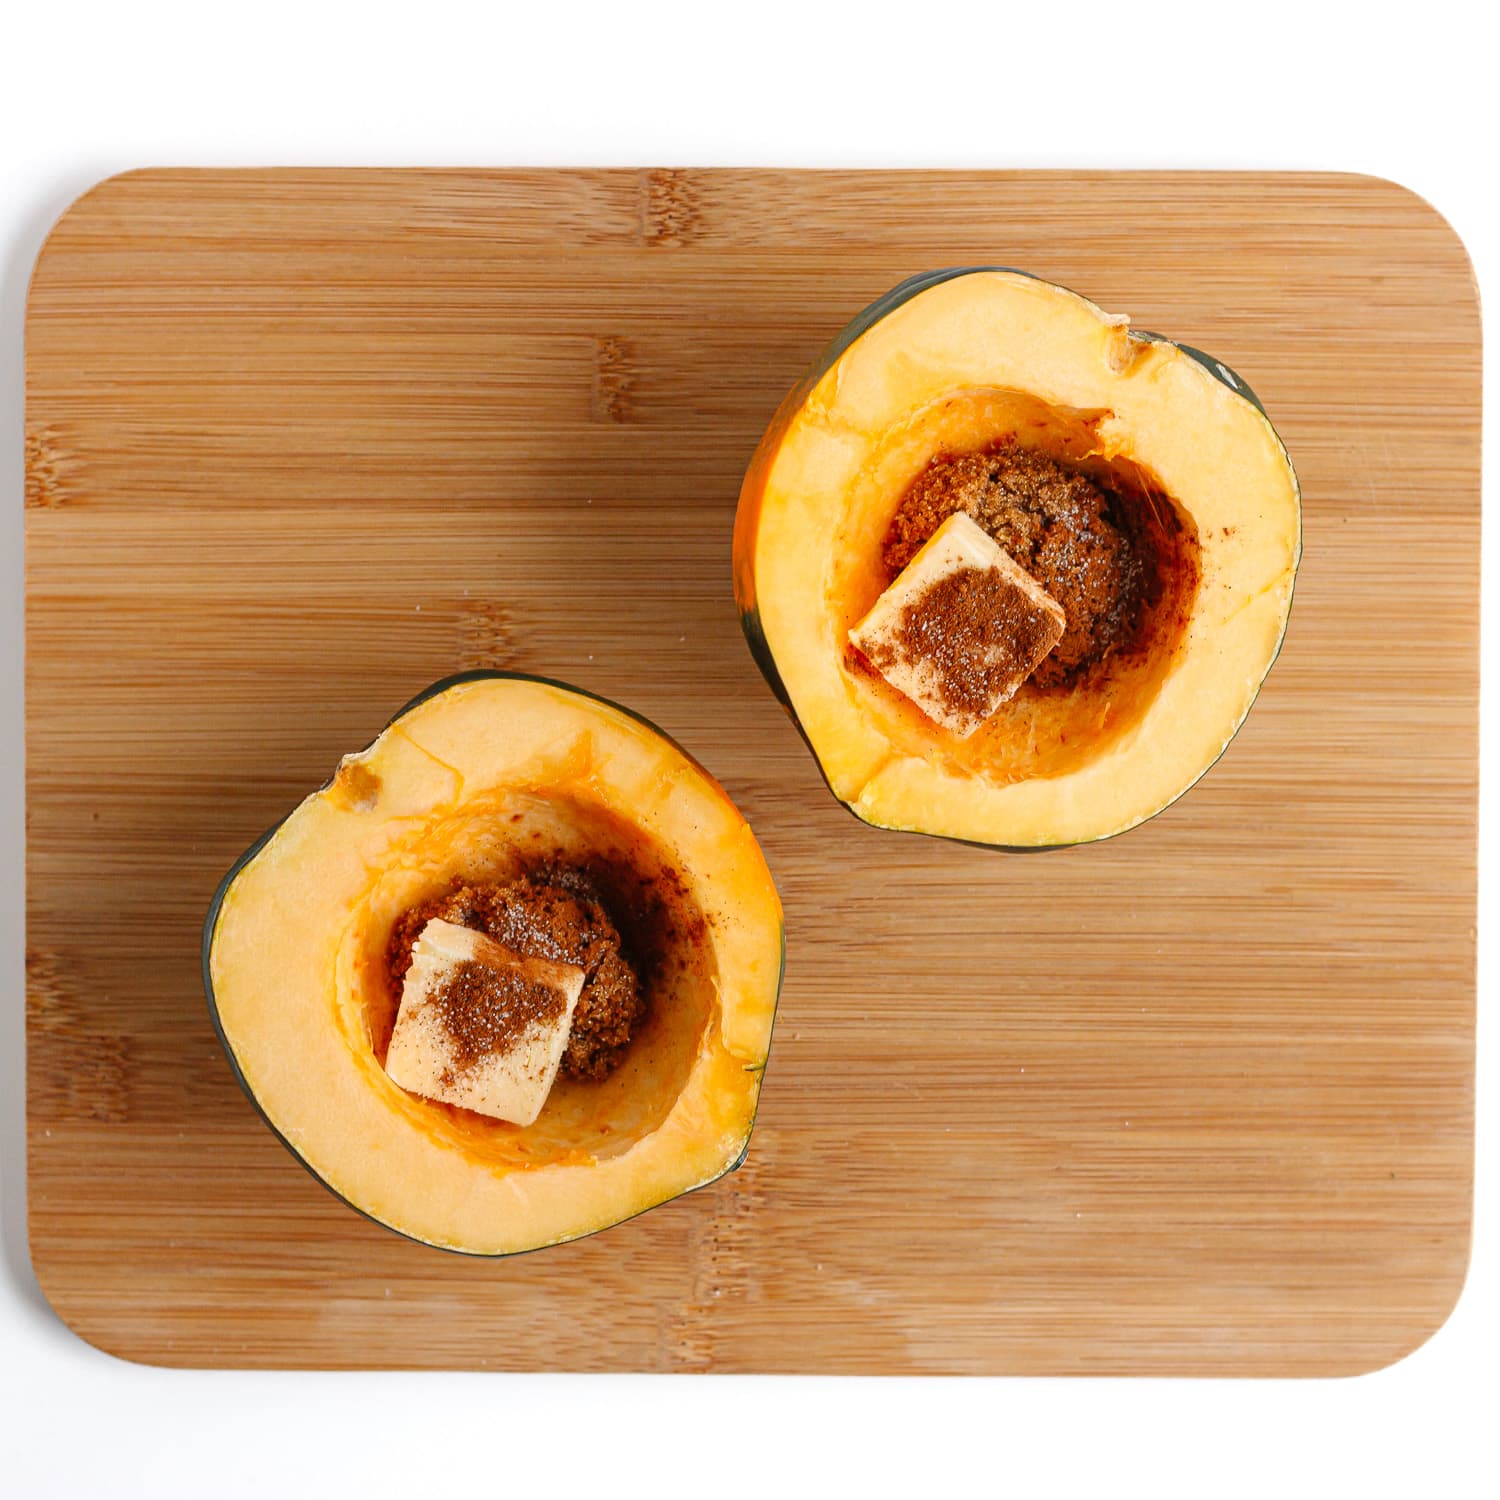 Butter and brown sugar topping distributed between two acorn squash halves on a wooden cutting board.